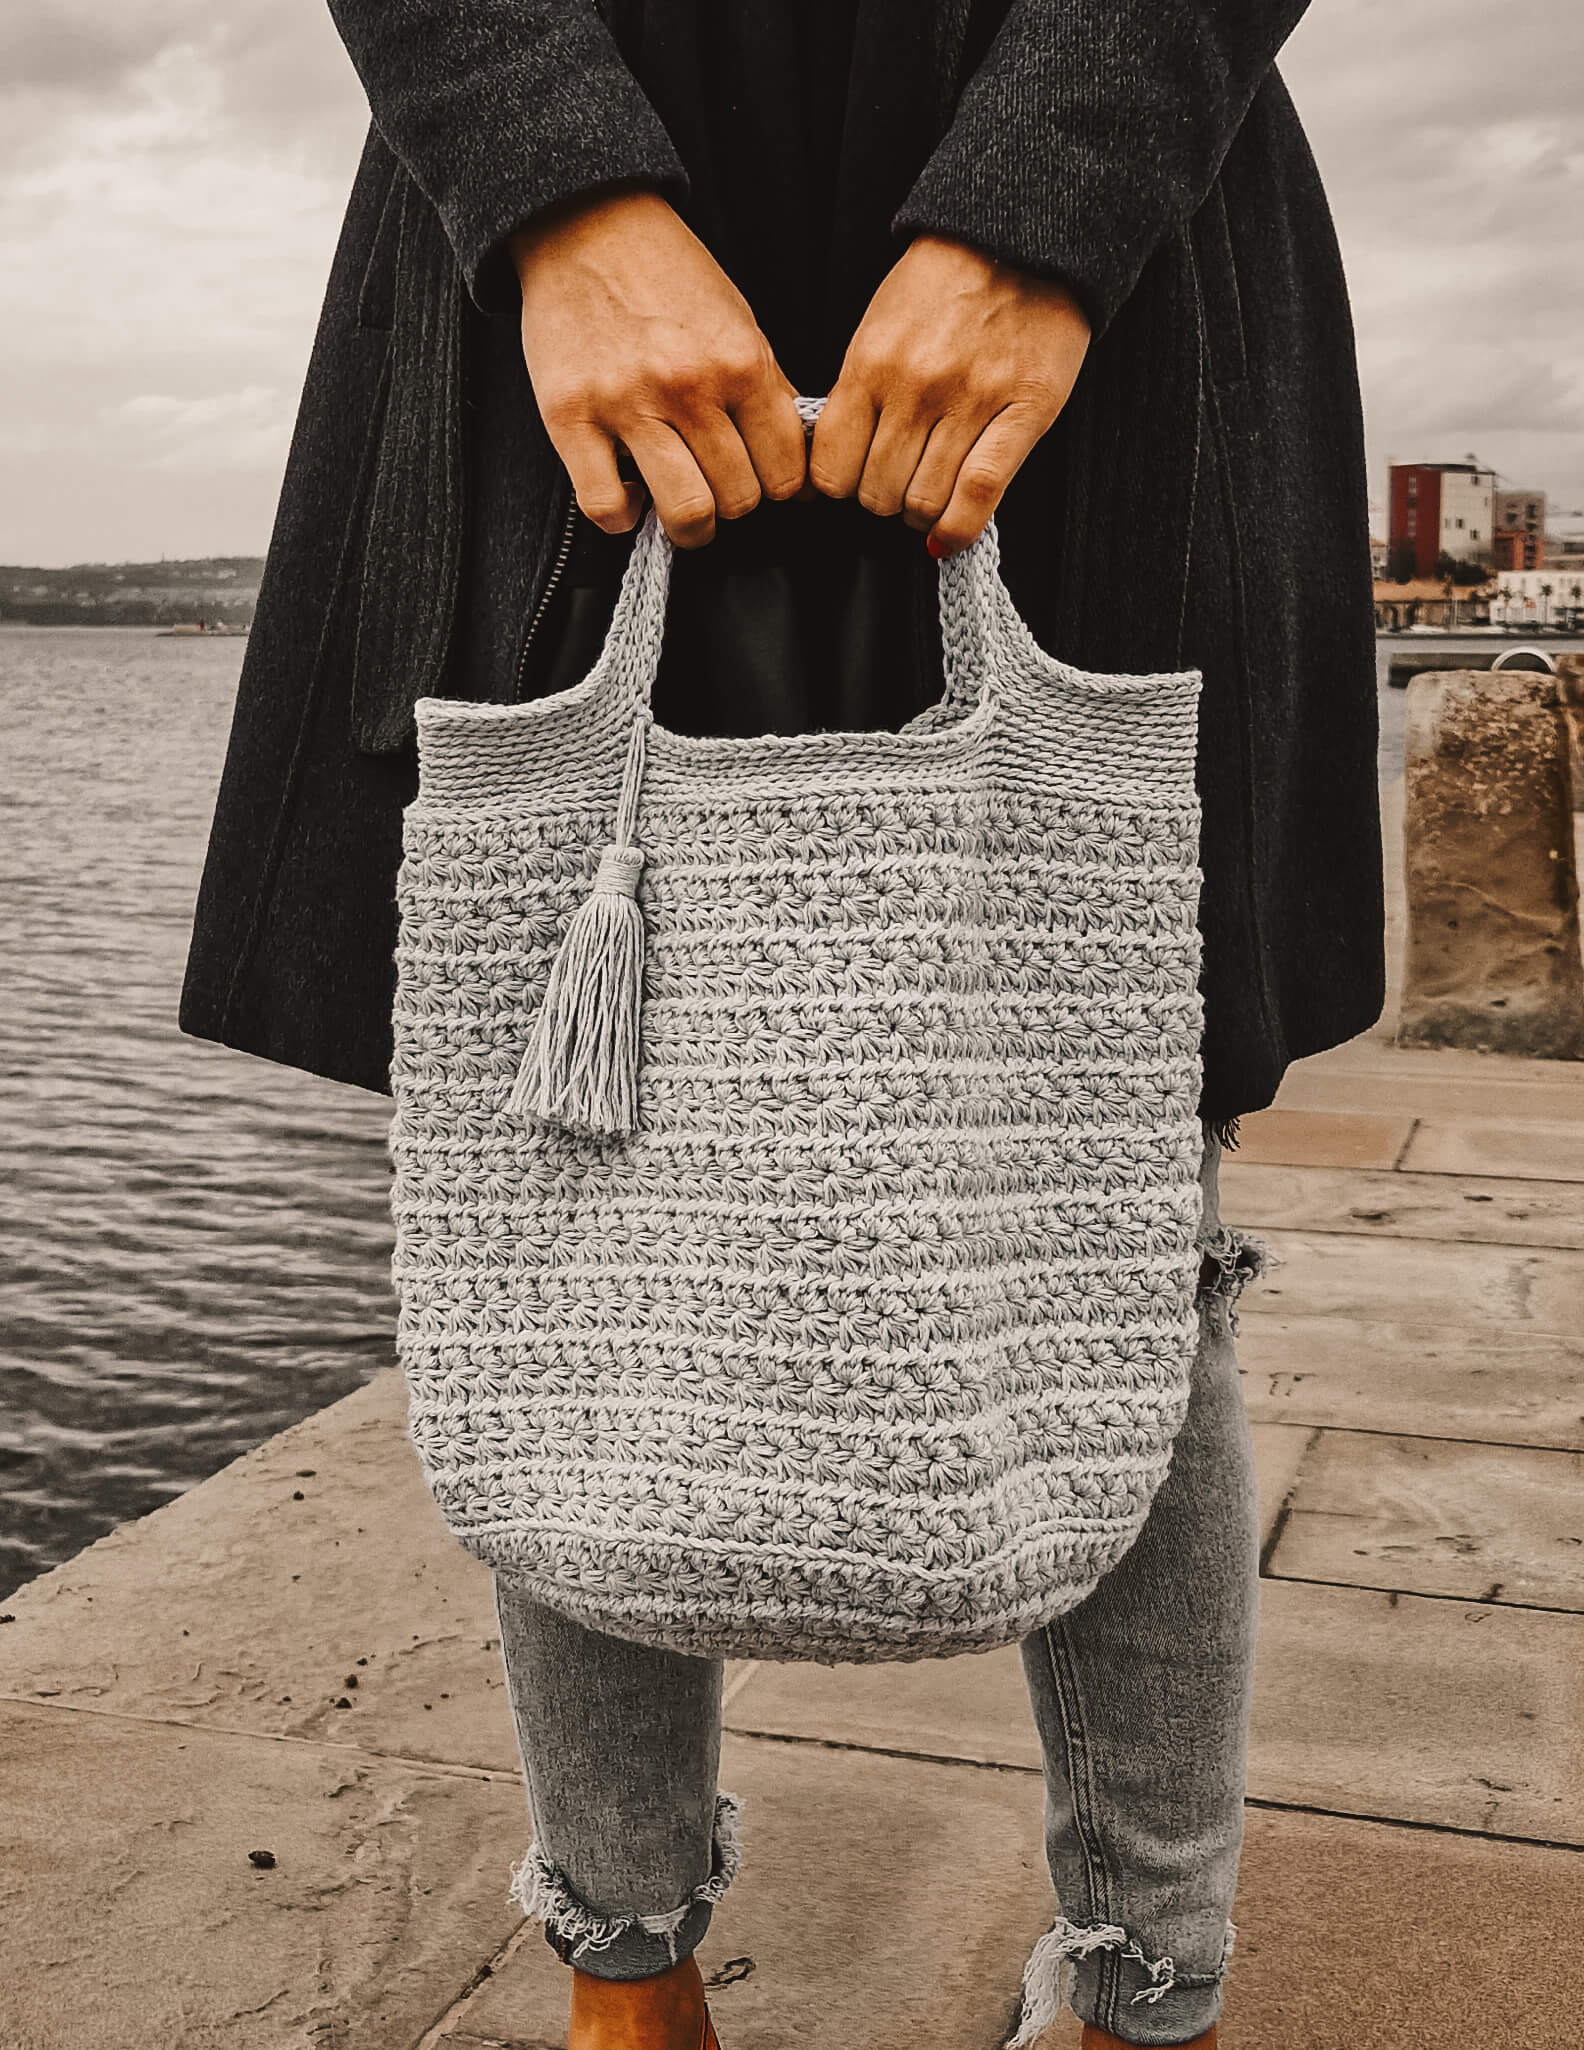 How to Crochet a Star Stitch Bag